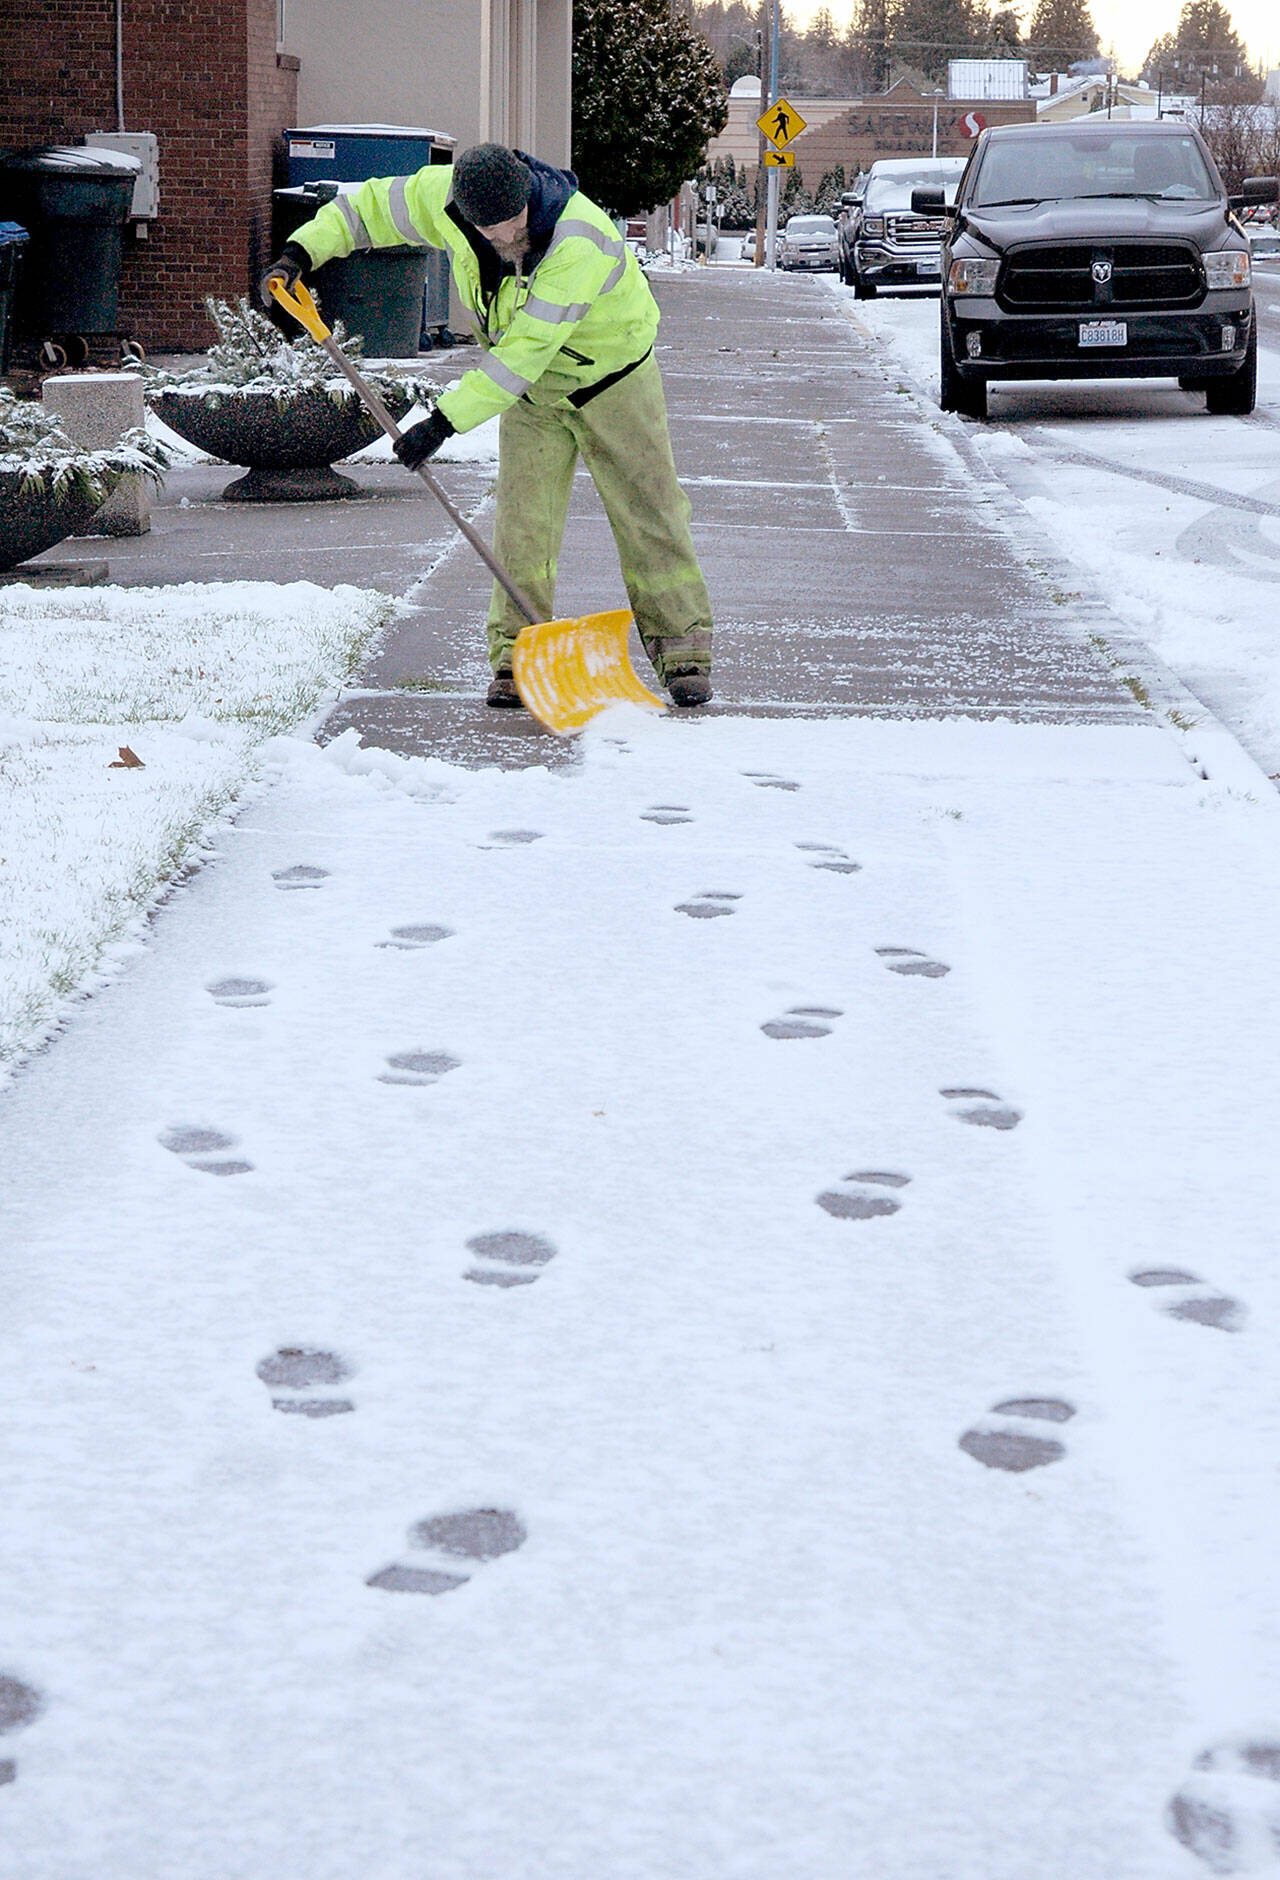 Port Angeles Parks and Recreation Department employee Darryl Anderson shovels a sidewalk along East Fourth Street near Vern Burton Community Center after snow coated much of the North Olympic Peninsula Thursday morning. (Keith Thorpe/Peninsula Daily News)